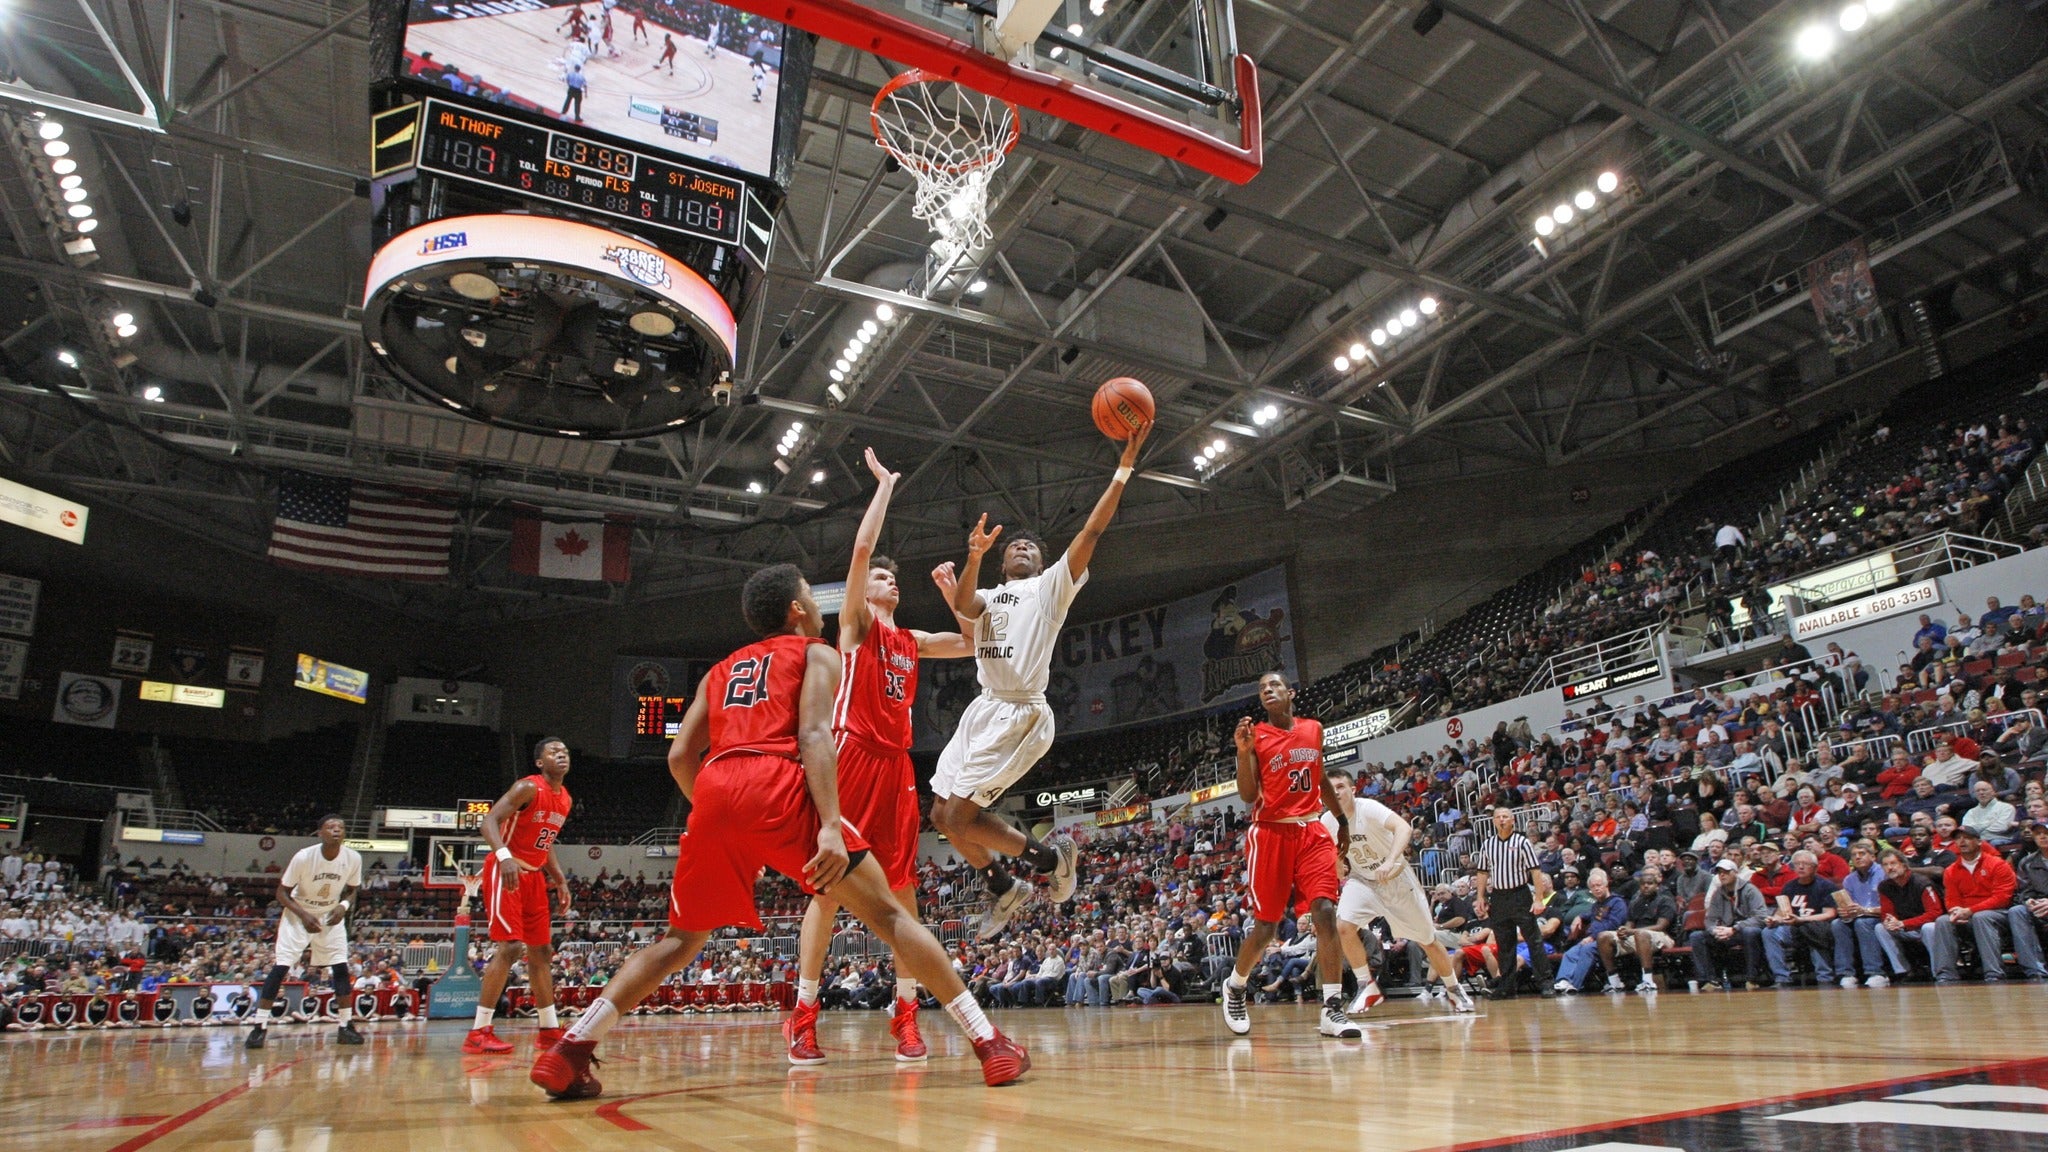 IHSA Basketball Championships - Class 2A Semifinals in Peoria promo photo for IHSA All-Session presale offer code